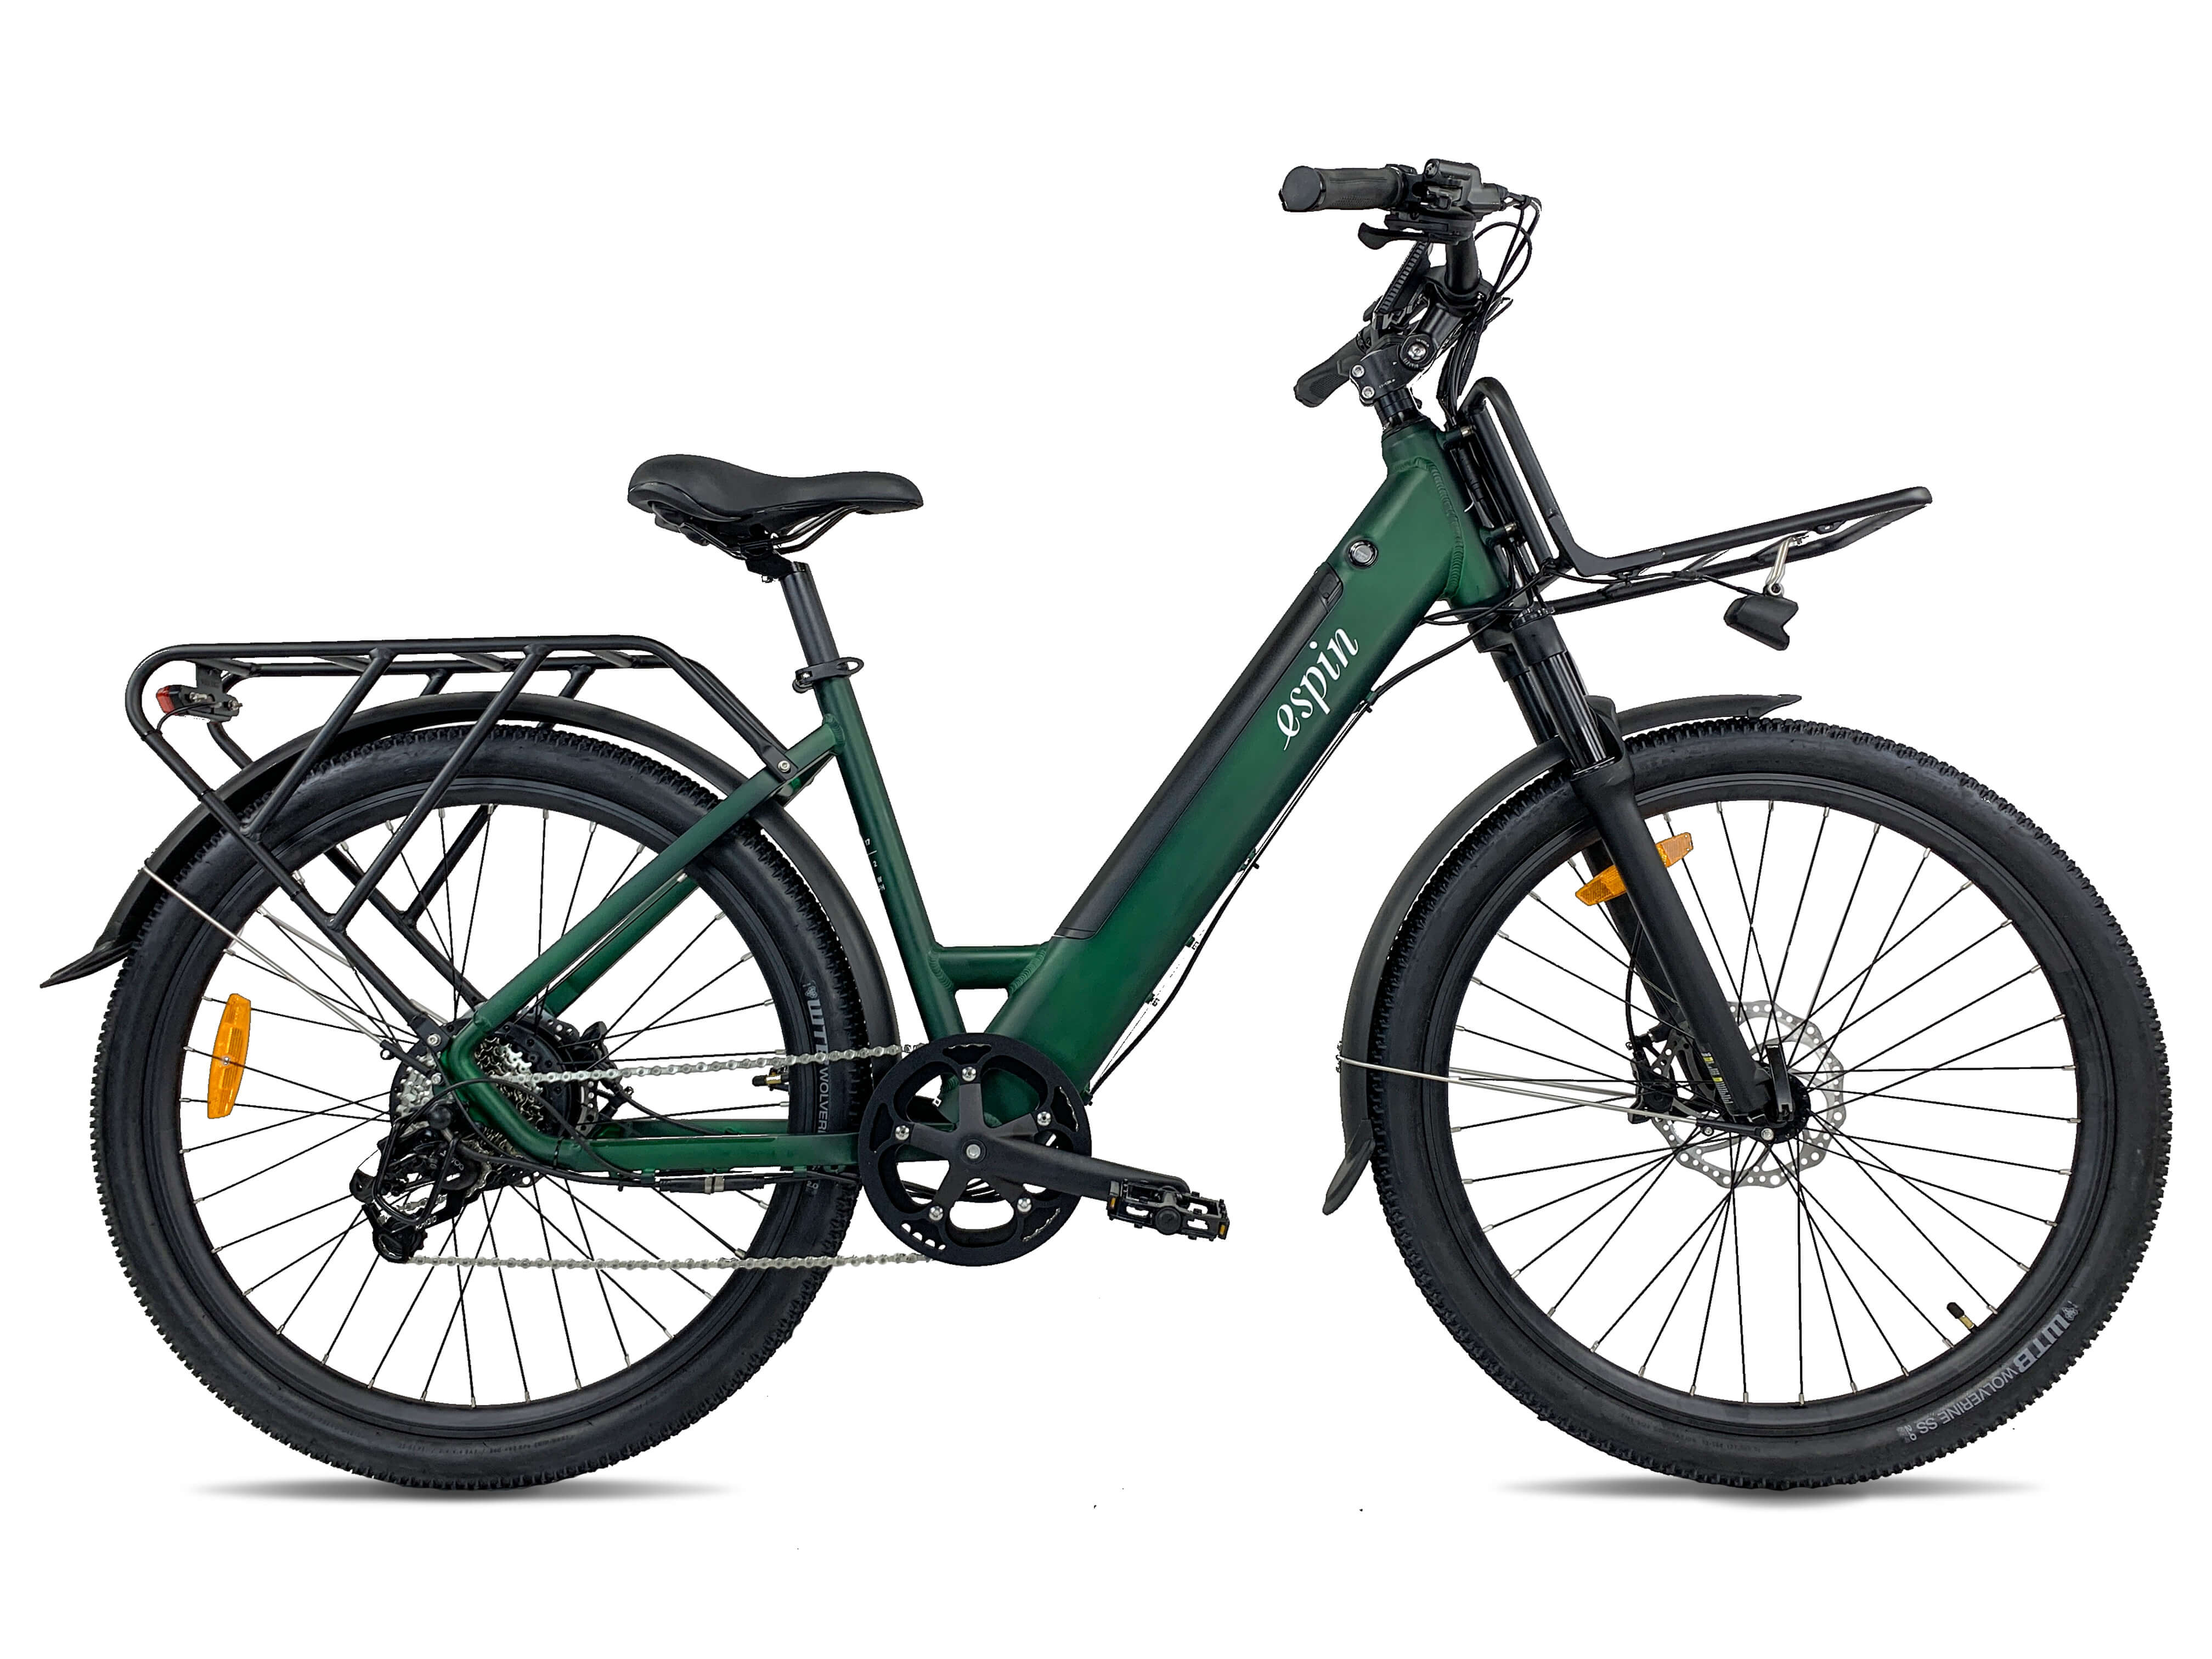 Espin Folding Fat Tire Electric Bike & City Bicycle & urban commuter bikes is capable and affordable